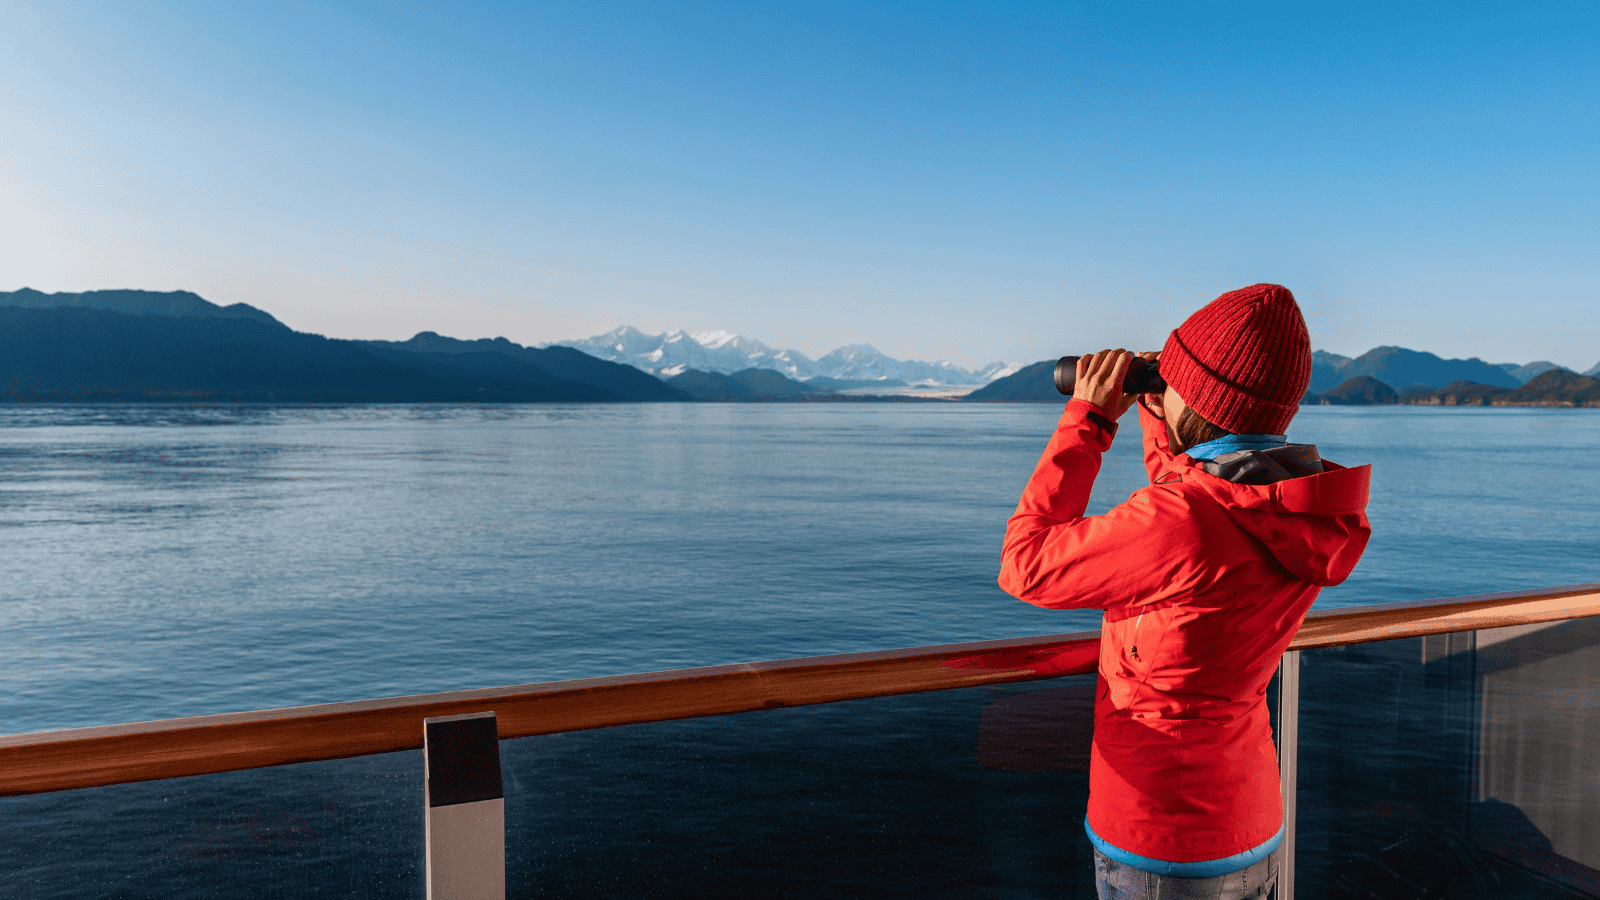 <p><a href="https://www.princess.com/en-us/cruise-destinations/alaska-cruises" rel="nofollow external noopener noreferrer">Princess Cruises</a> offers an exciting seven-day voyage through Alaska’s Inside Passage. This route follows glacial waterways of various sizes from <a href="https://whatthefab.com/fun-things-to-do-in-seattle.html" rel="follow">Seattle</a>, Washington, to Skagway, Alaska. Along the way, passengers can sightsee breathtaking glaciers and native wildlife. </p><p>Optional excursions include visiting small fishing villages and going on a helicopter tour. Seven days is the ideal amount of time to experience Alaska from the water.</p>